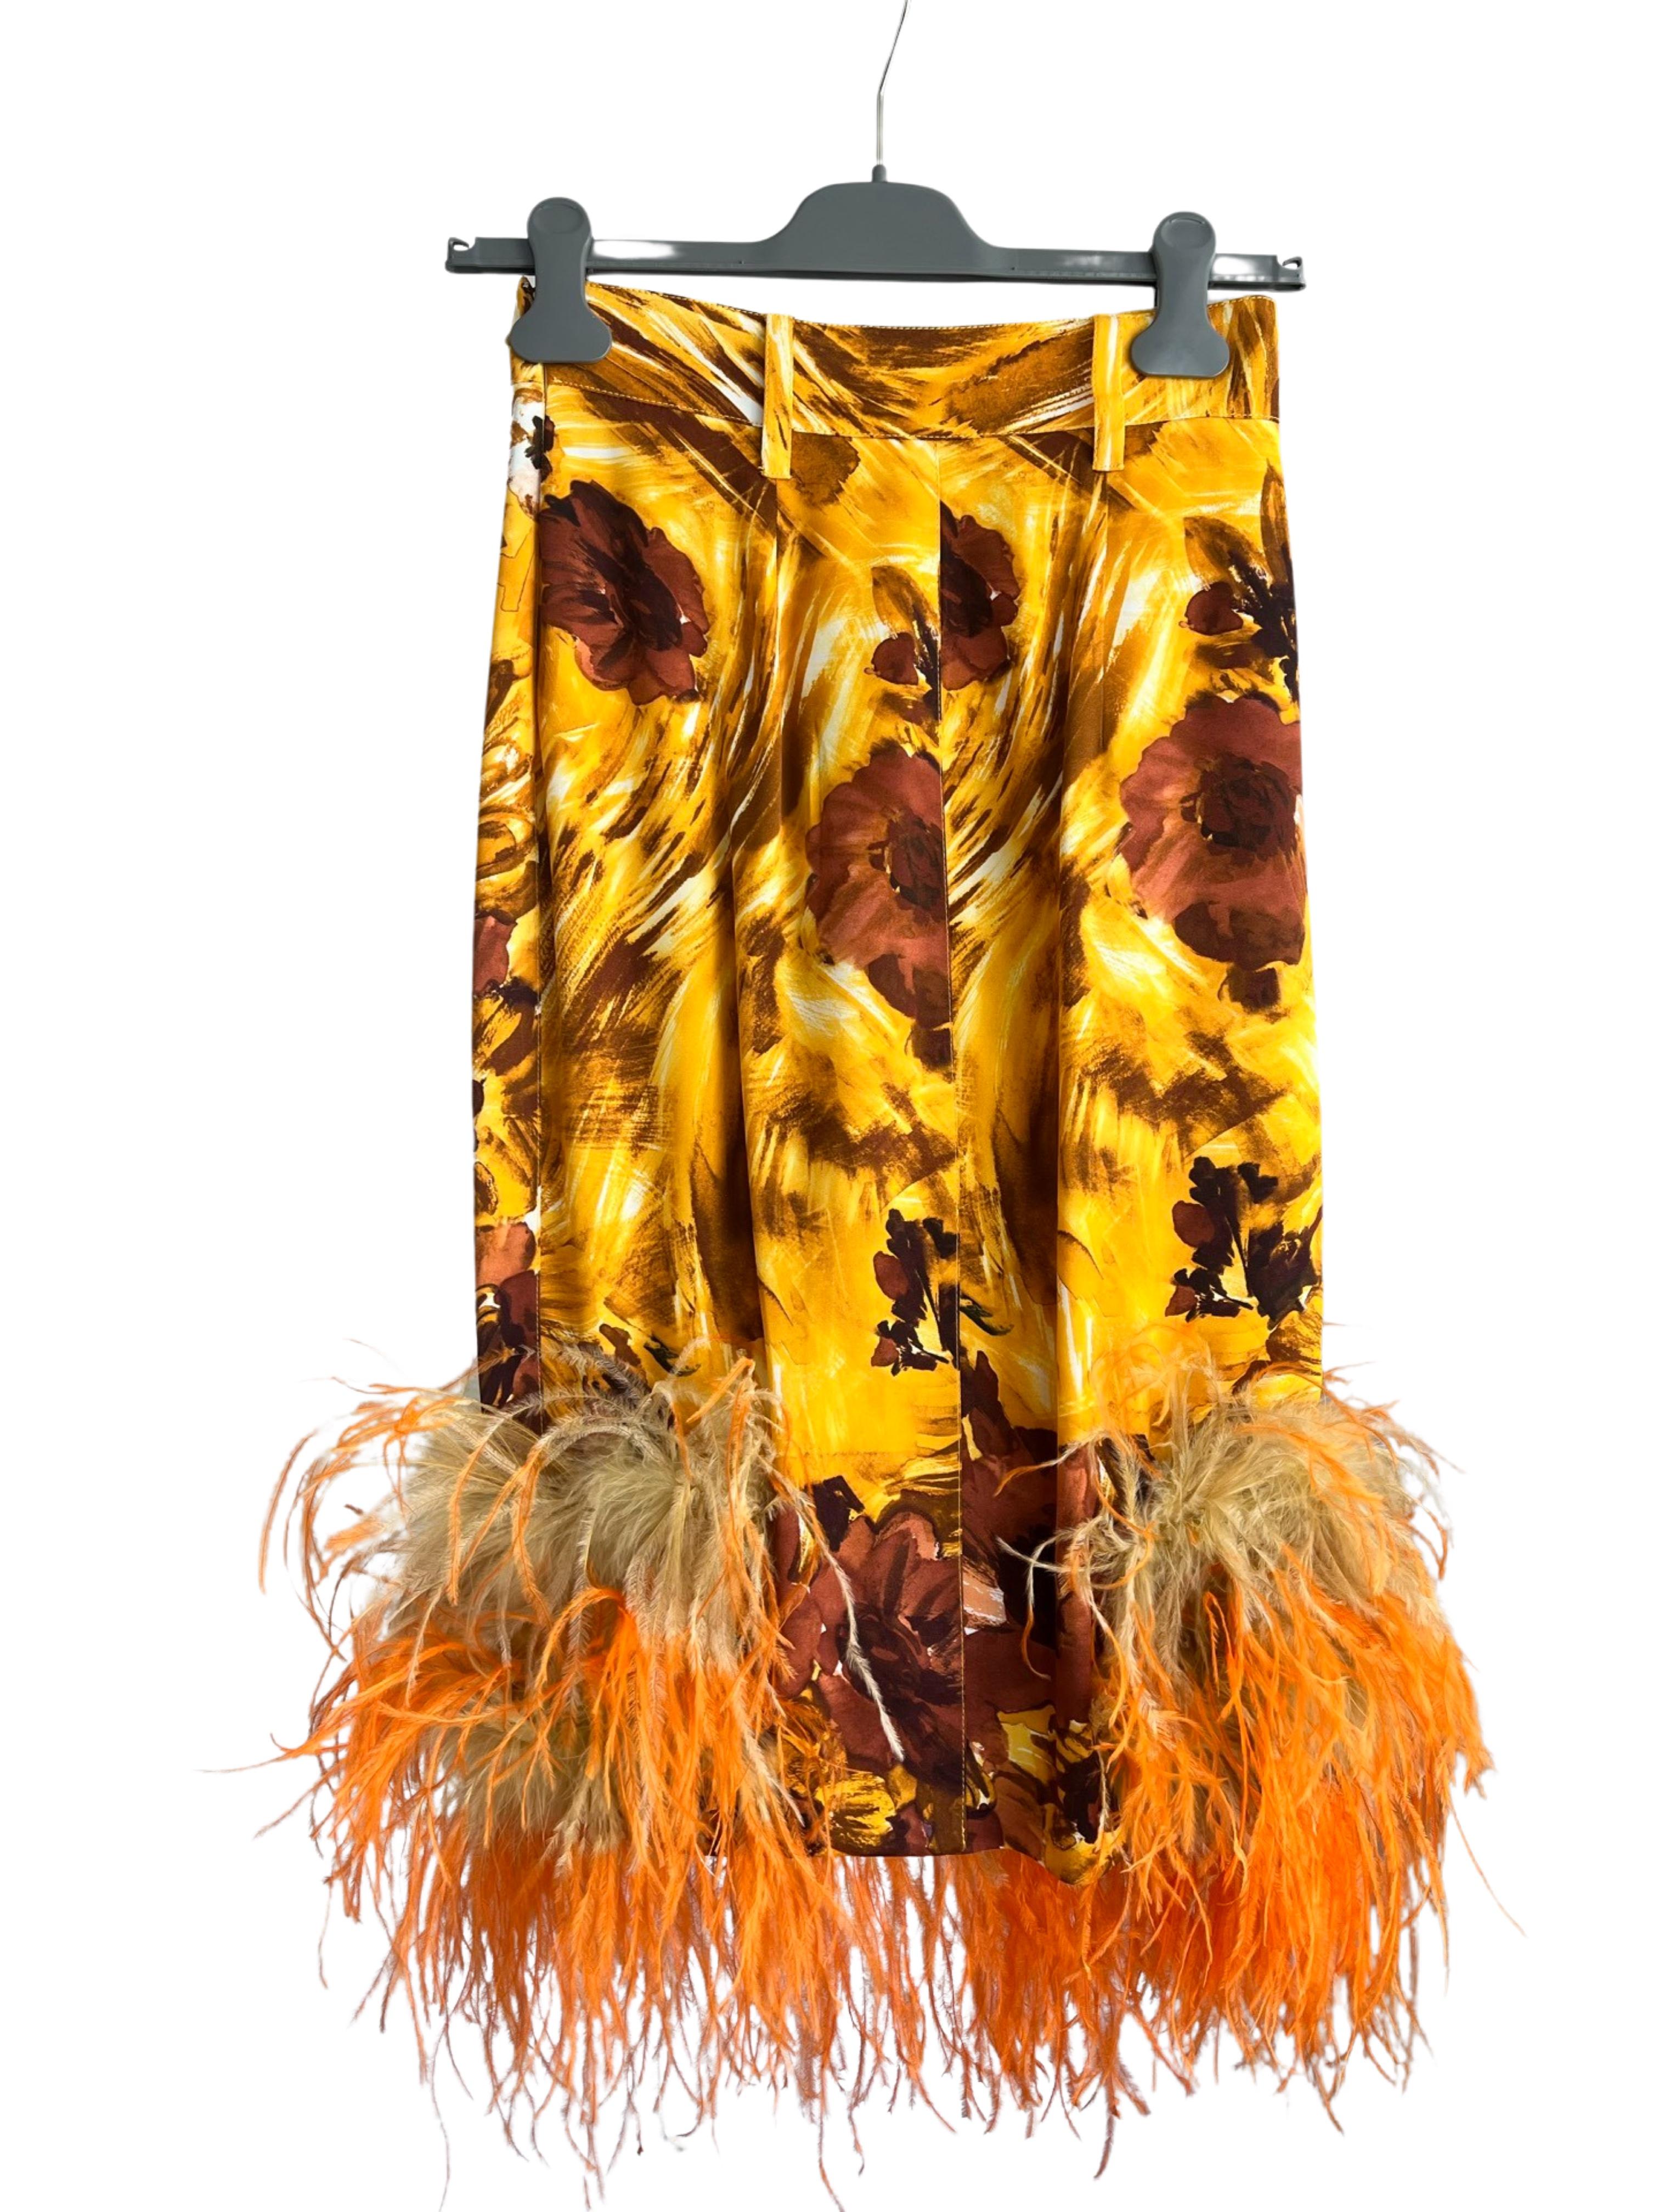 The 2017 Prada runway collection featured a stunning floral silk pencil skirt adorned with vibrant orange and yellow ostrich feathers. This exquisite piece combined the elegance of a classic silhouette with the whimsical beauty of nature-inspired